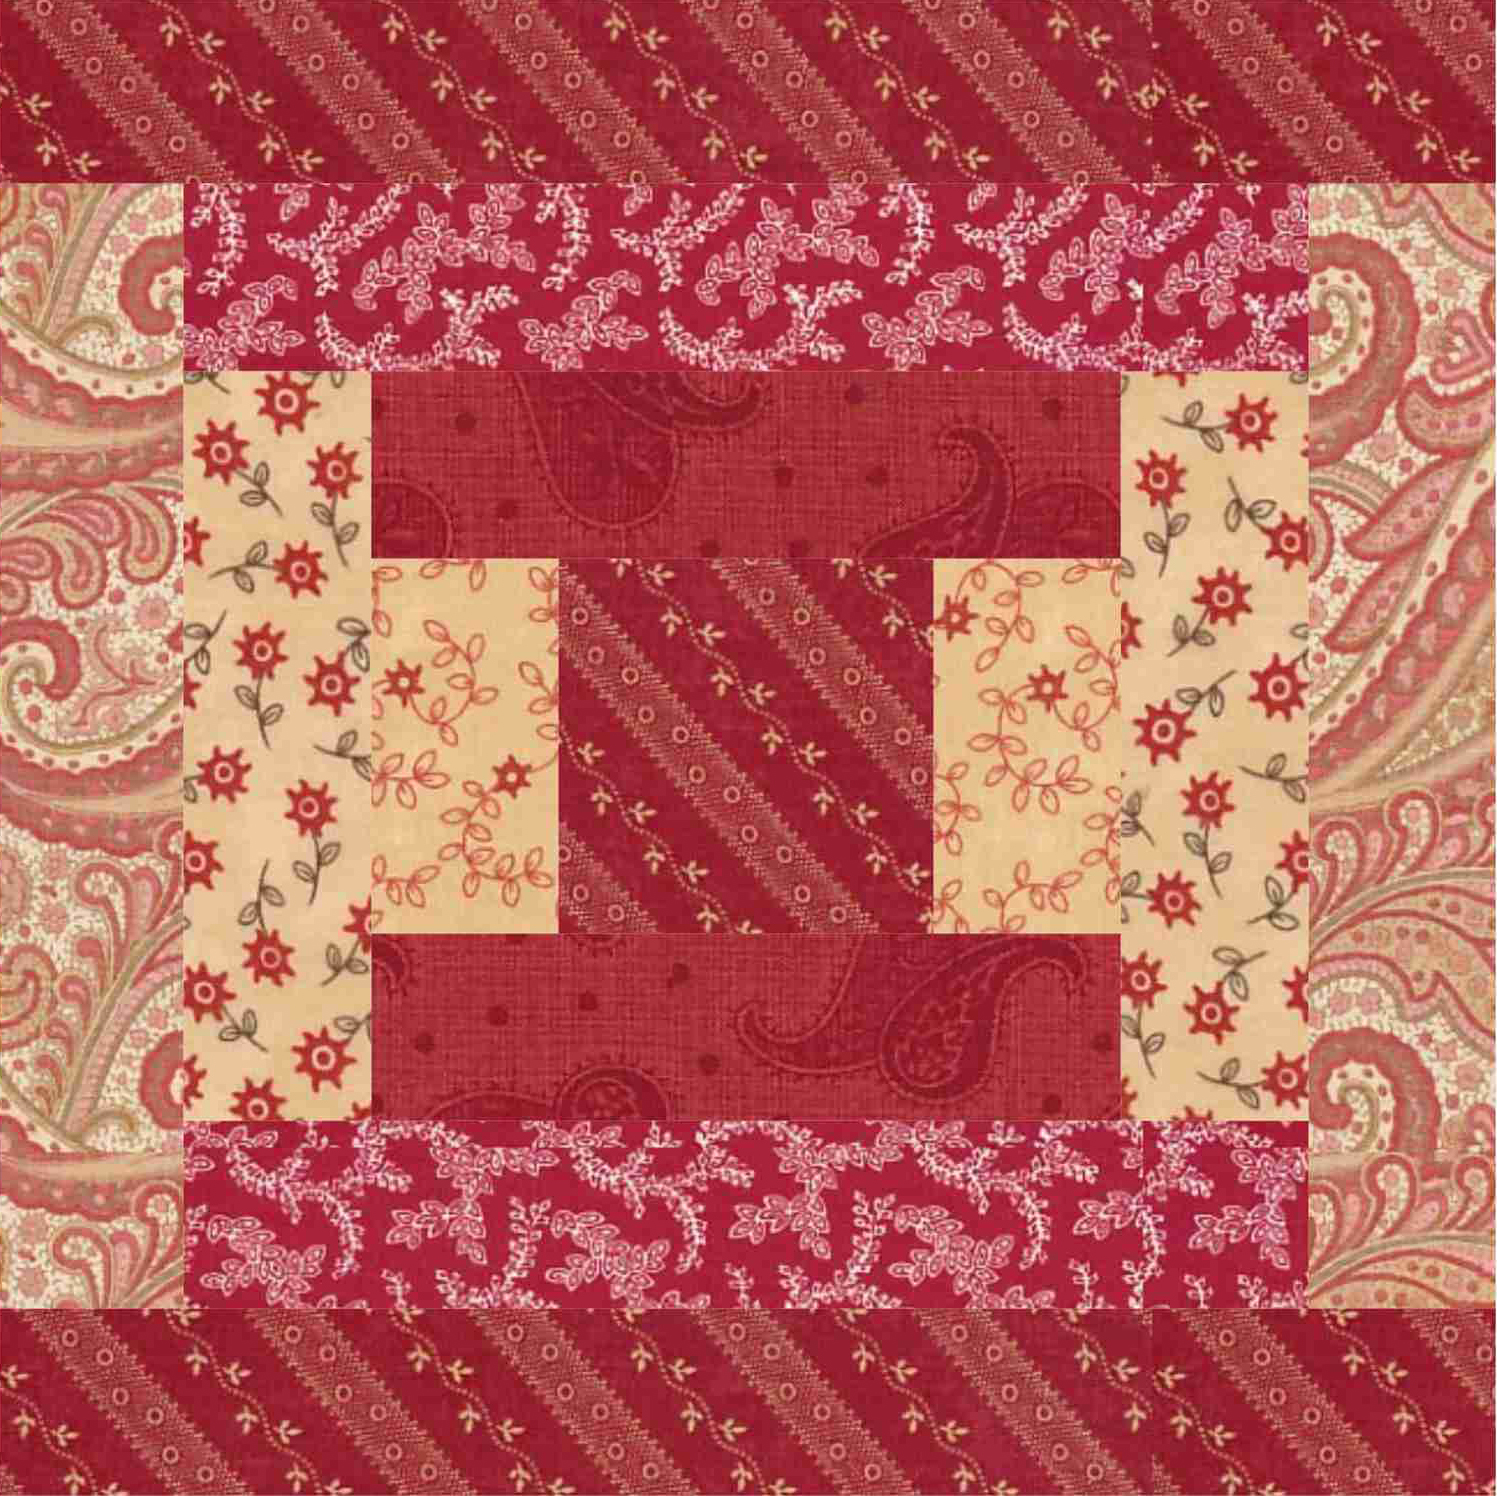 A Courthouse Steps Quilt Block